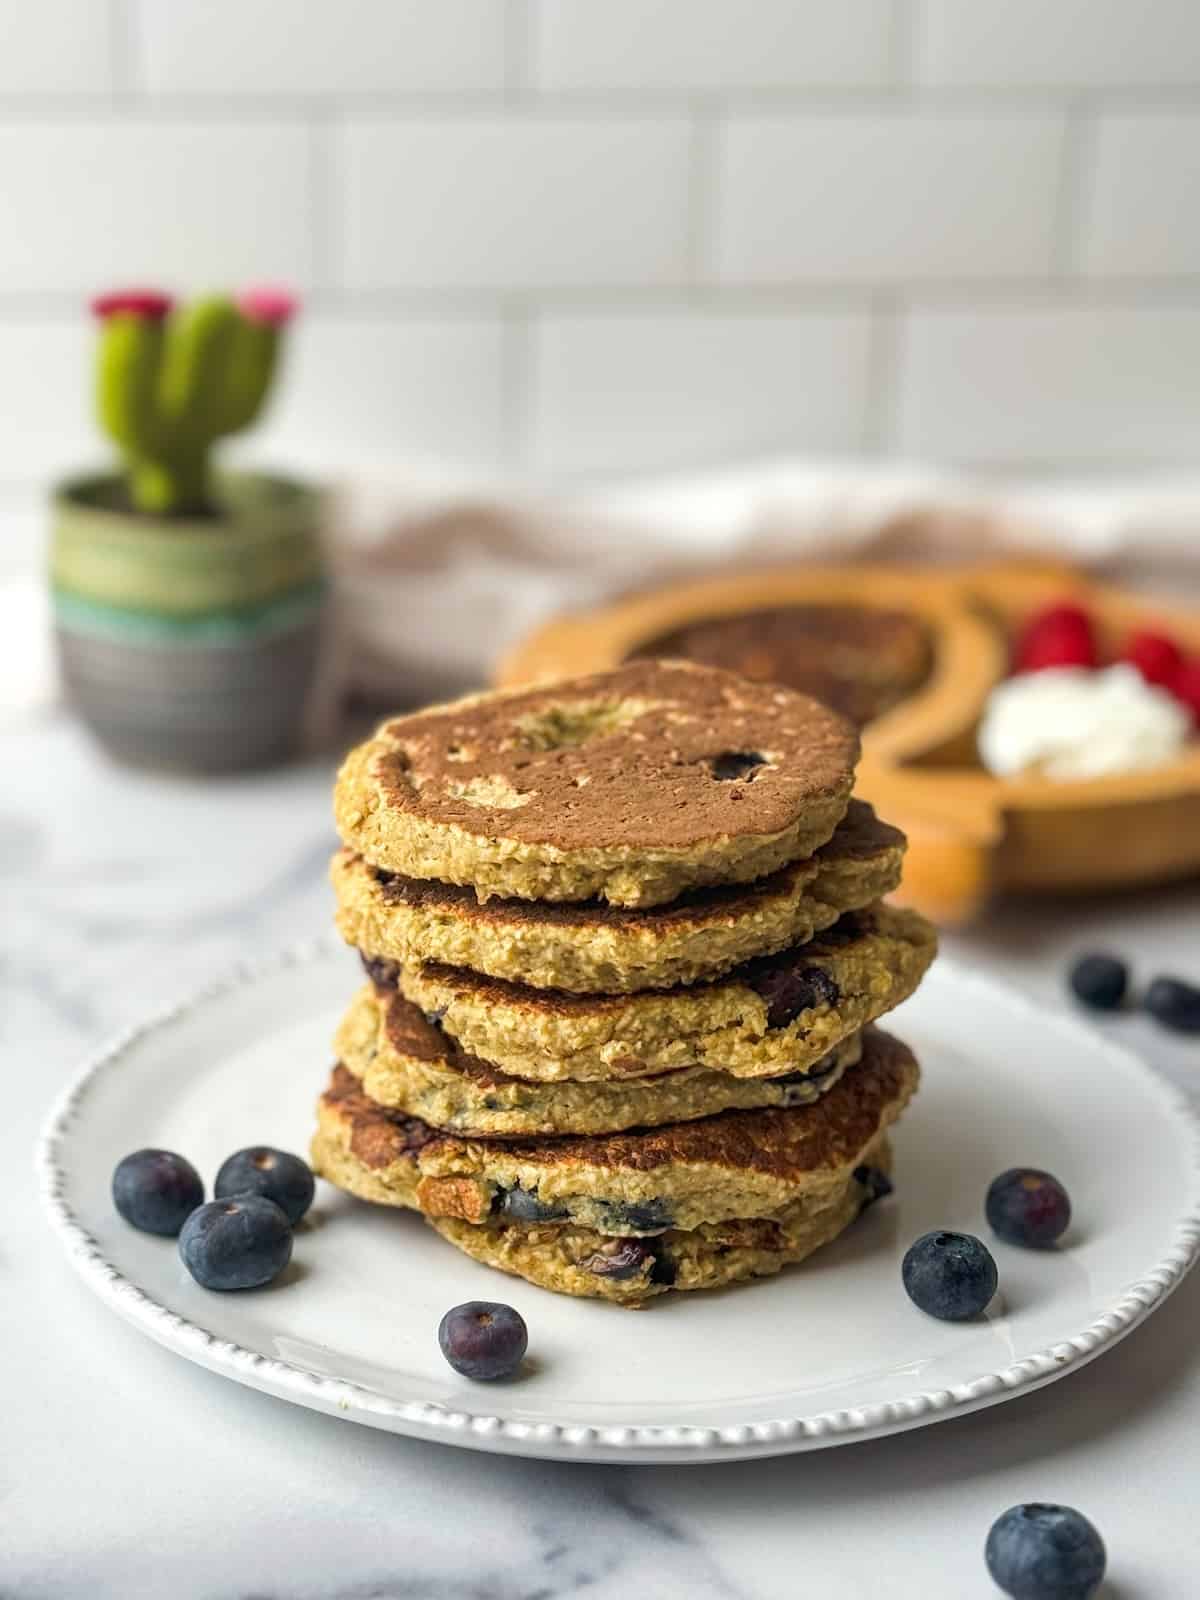 Stack of blueberry oatmeal pancakes on a white plate next to blueberries.